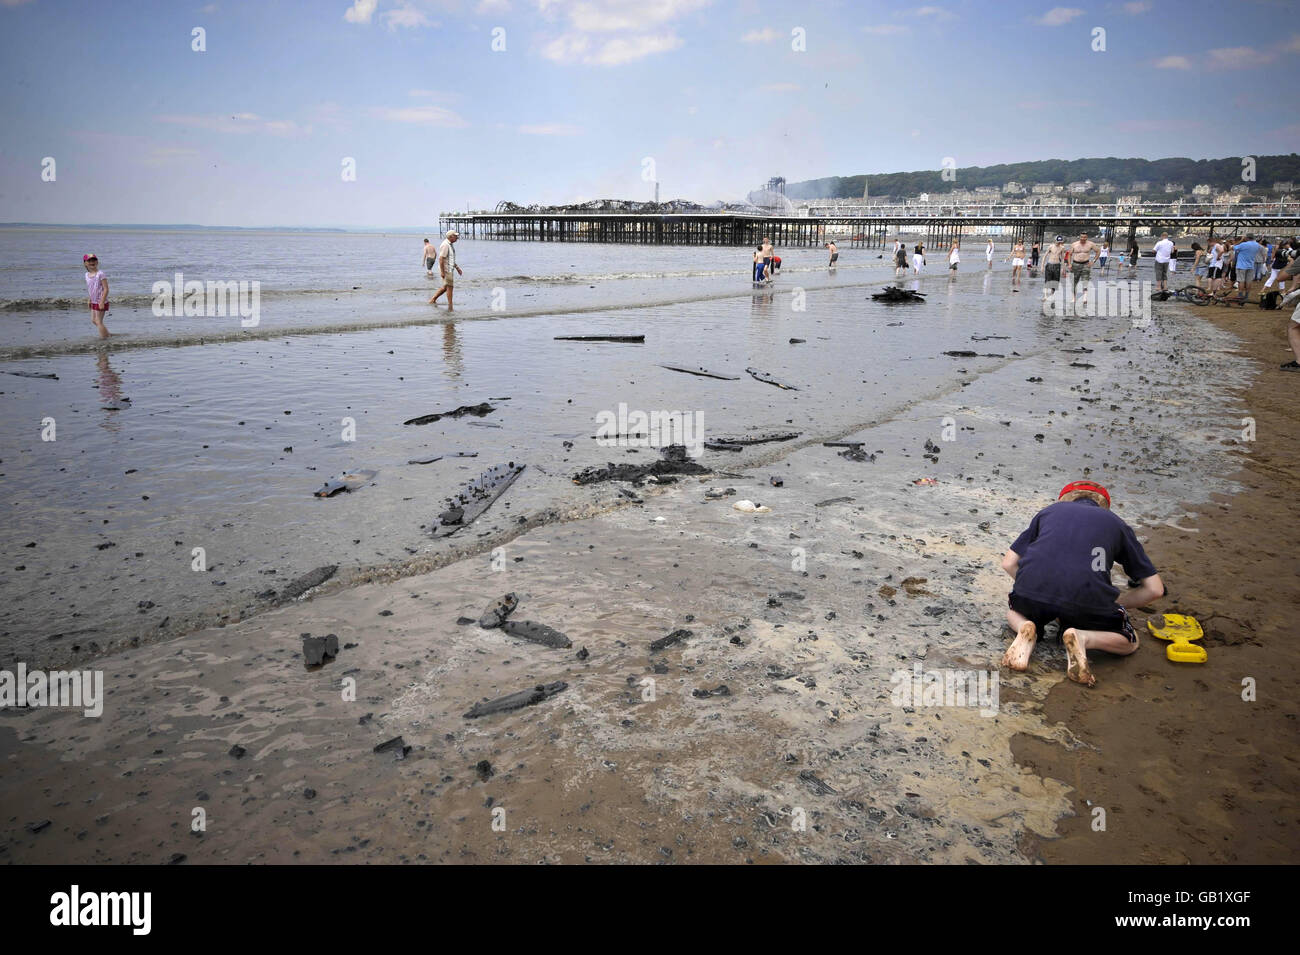 Burned debris is washed up on the beach next to the Grand Pier at Weston-super-Mare after a major fire broke out. Stock Photo